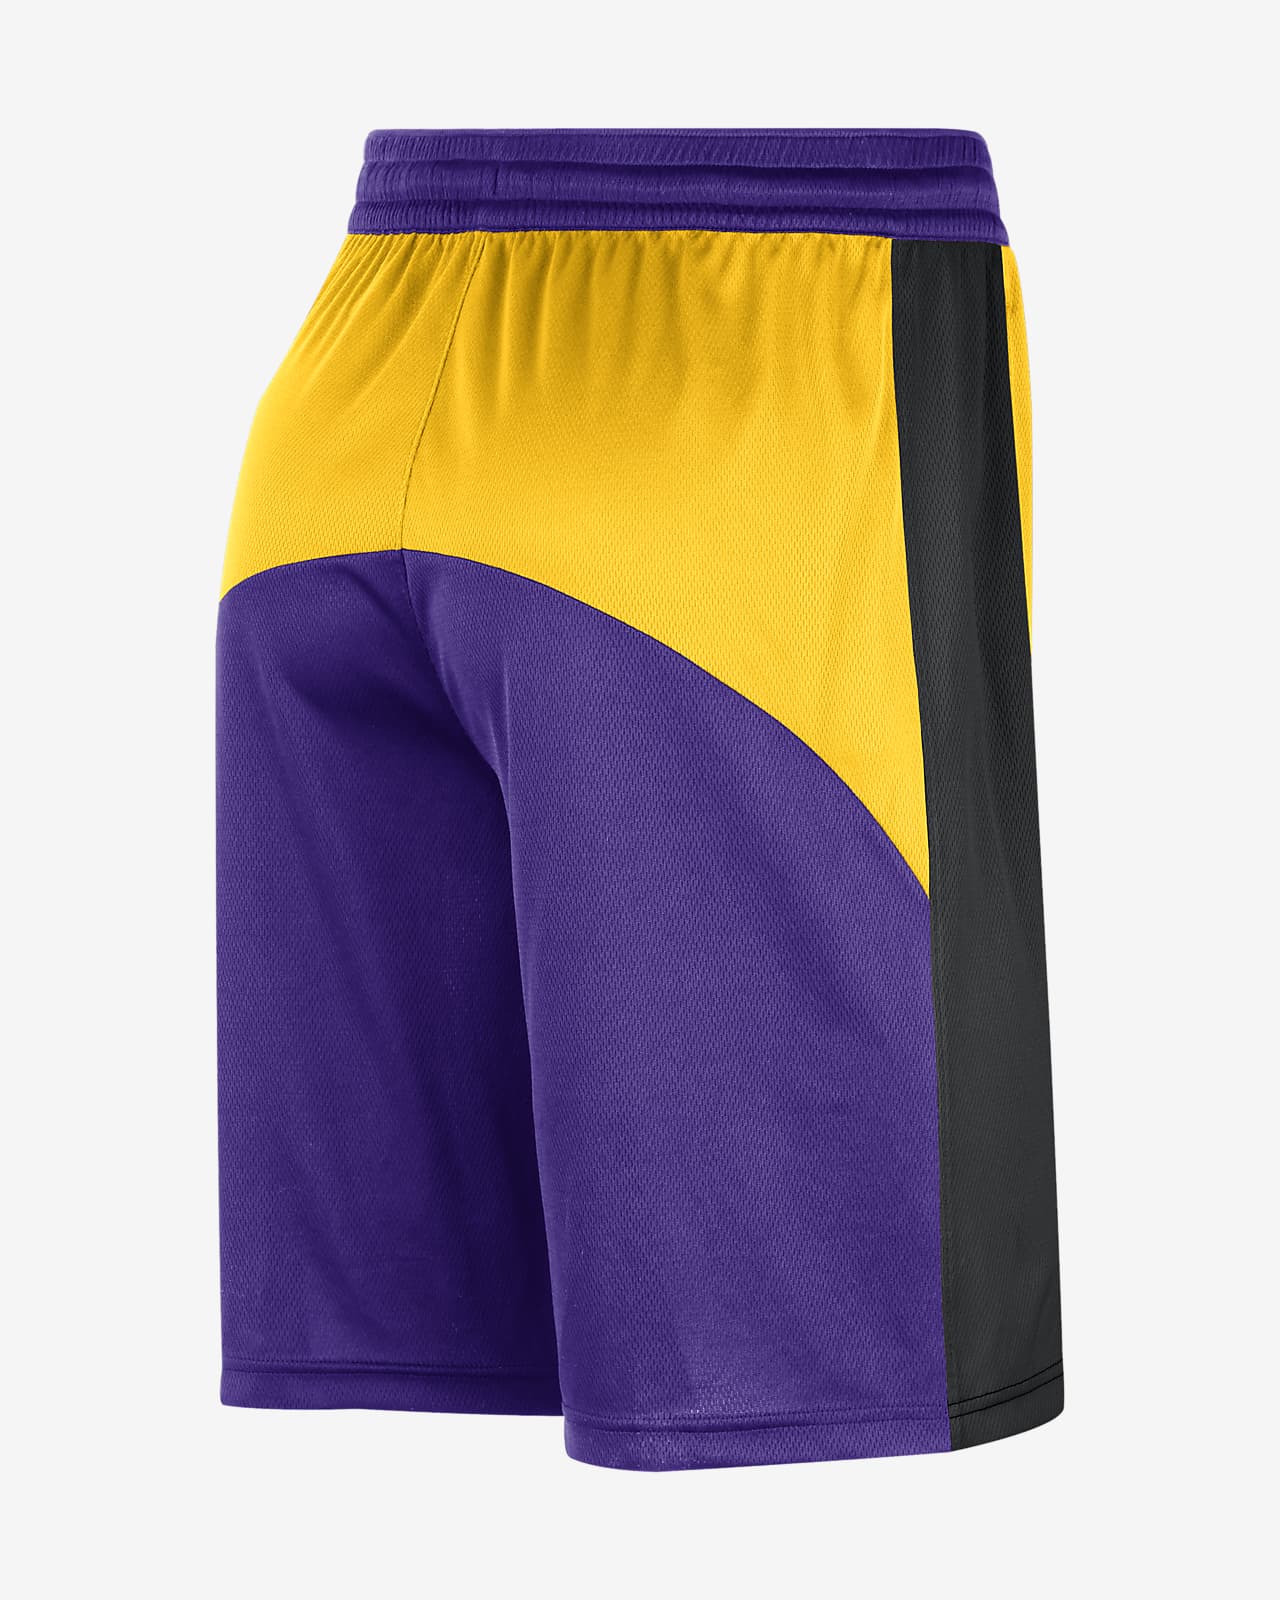 Official Los Angeles Lakers Ladies Boxers and Underwear